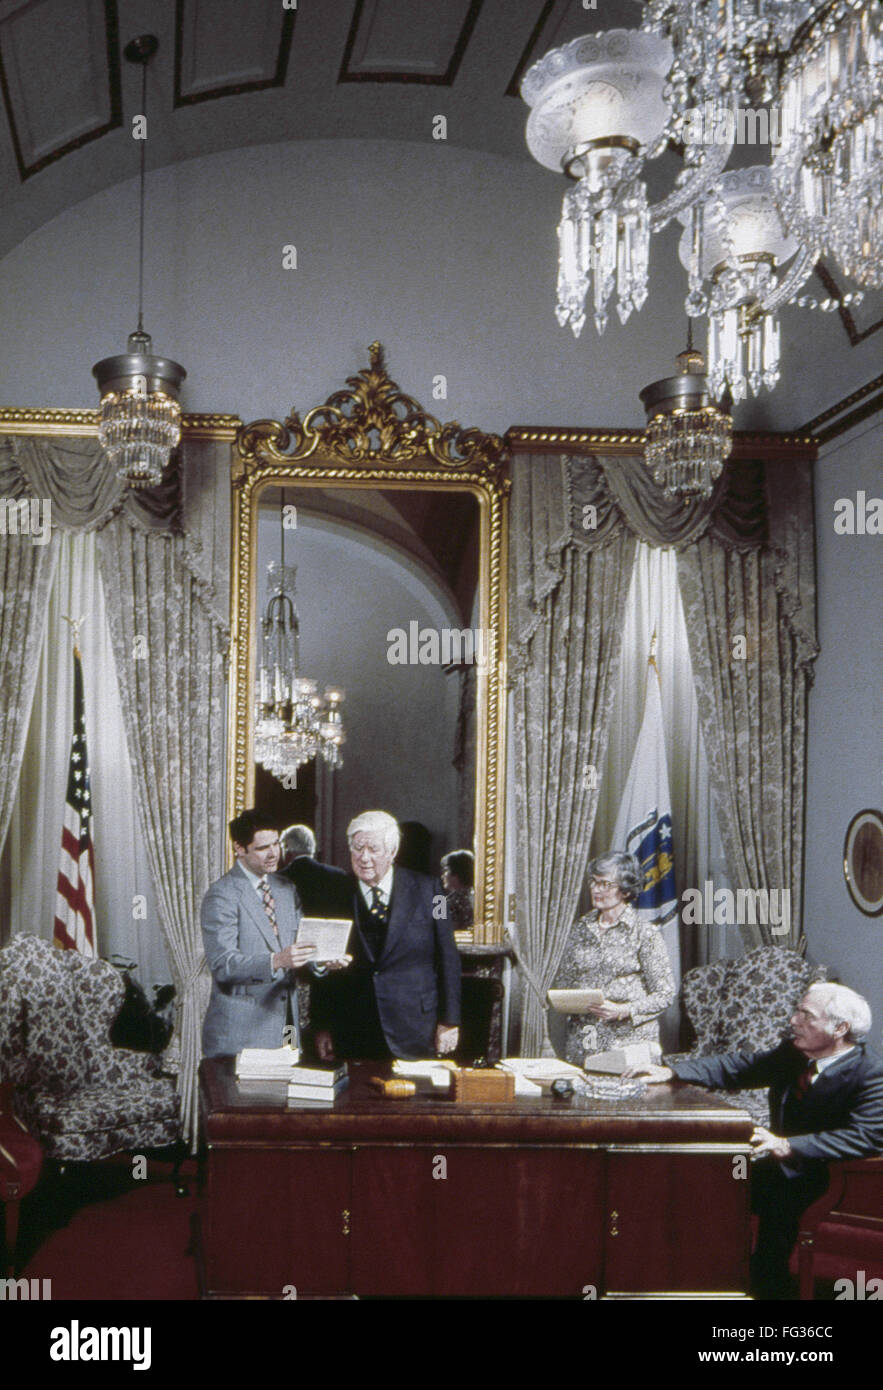 THOMAS PHILLIP O'NEILL /n(1912-1994). Known as Tip. American politician. Conferring with aides in his office at the U.S. Capitol in Washington, D.C., while serving as Speaker of the House of Representatives. Photographed c1978. Stock Photo